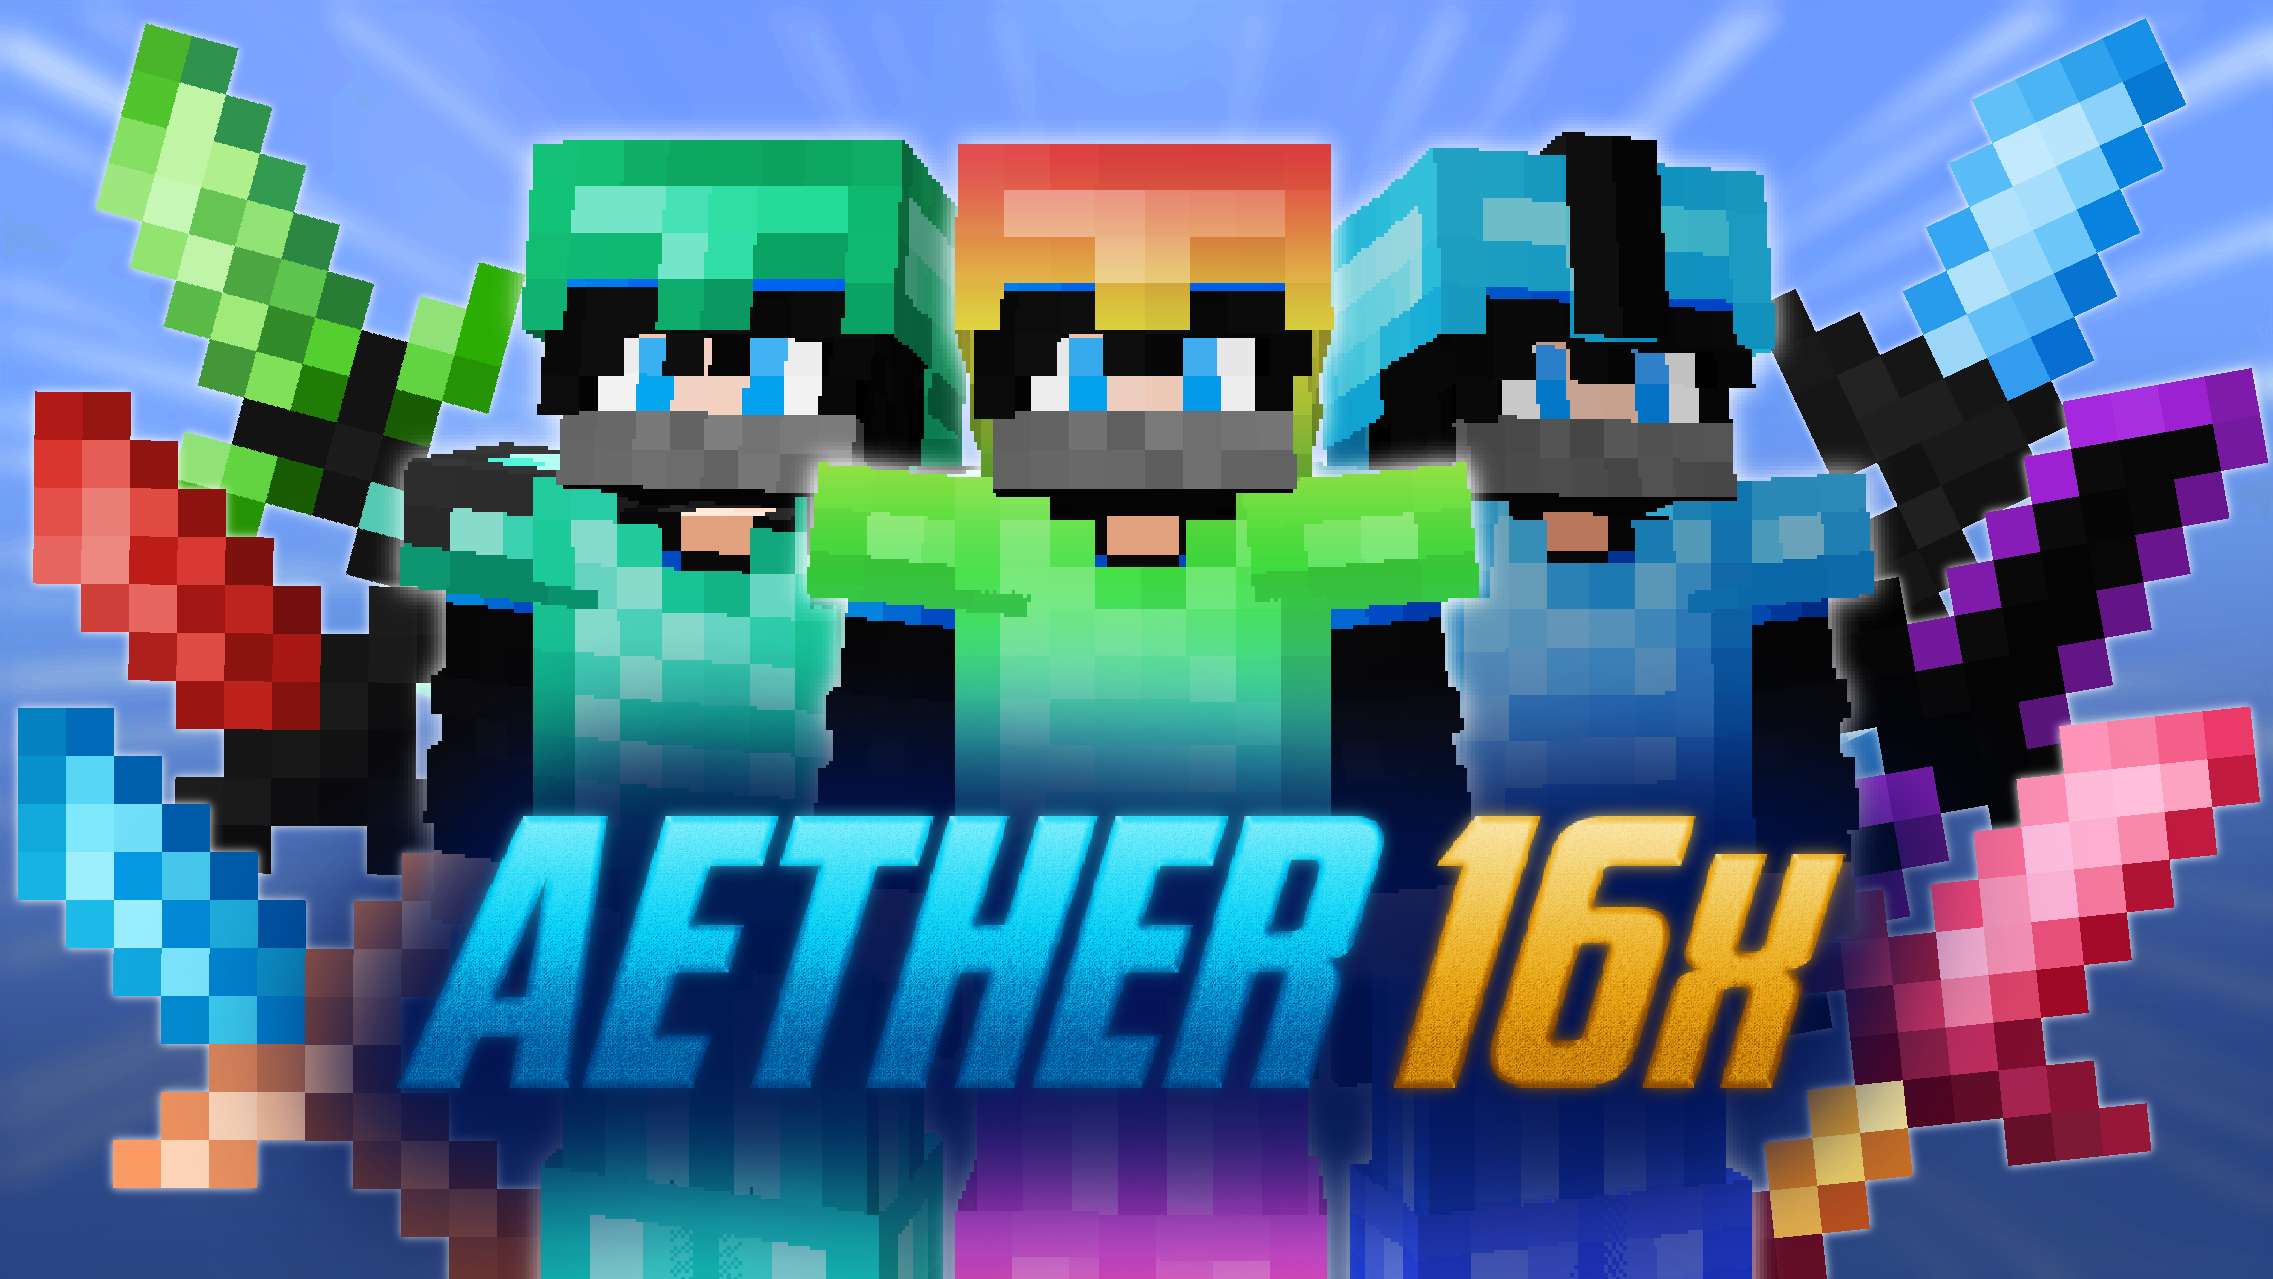 Aether 16x [sweatg0d] 16 by Mqryo on PvPRP